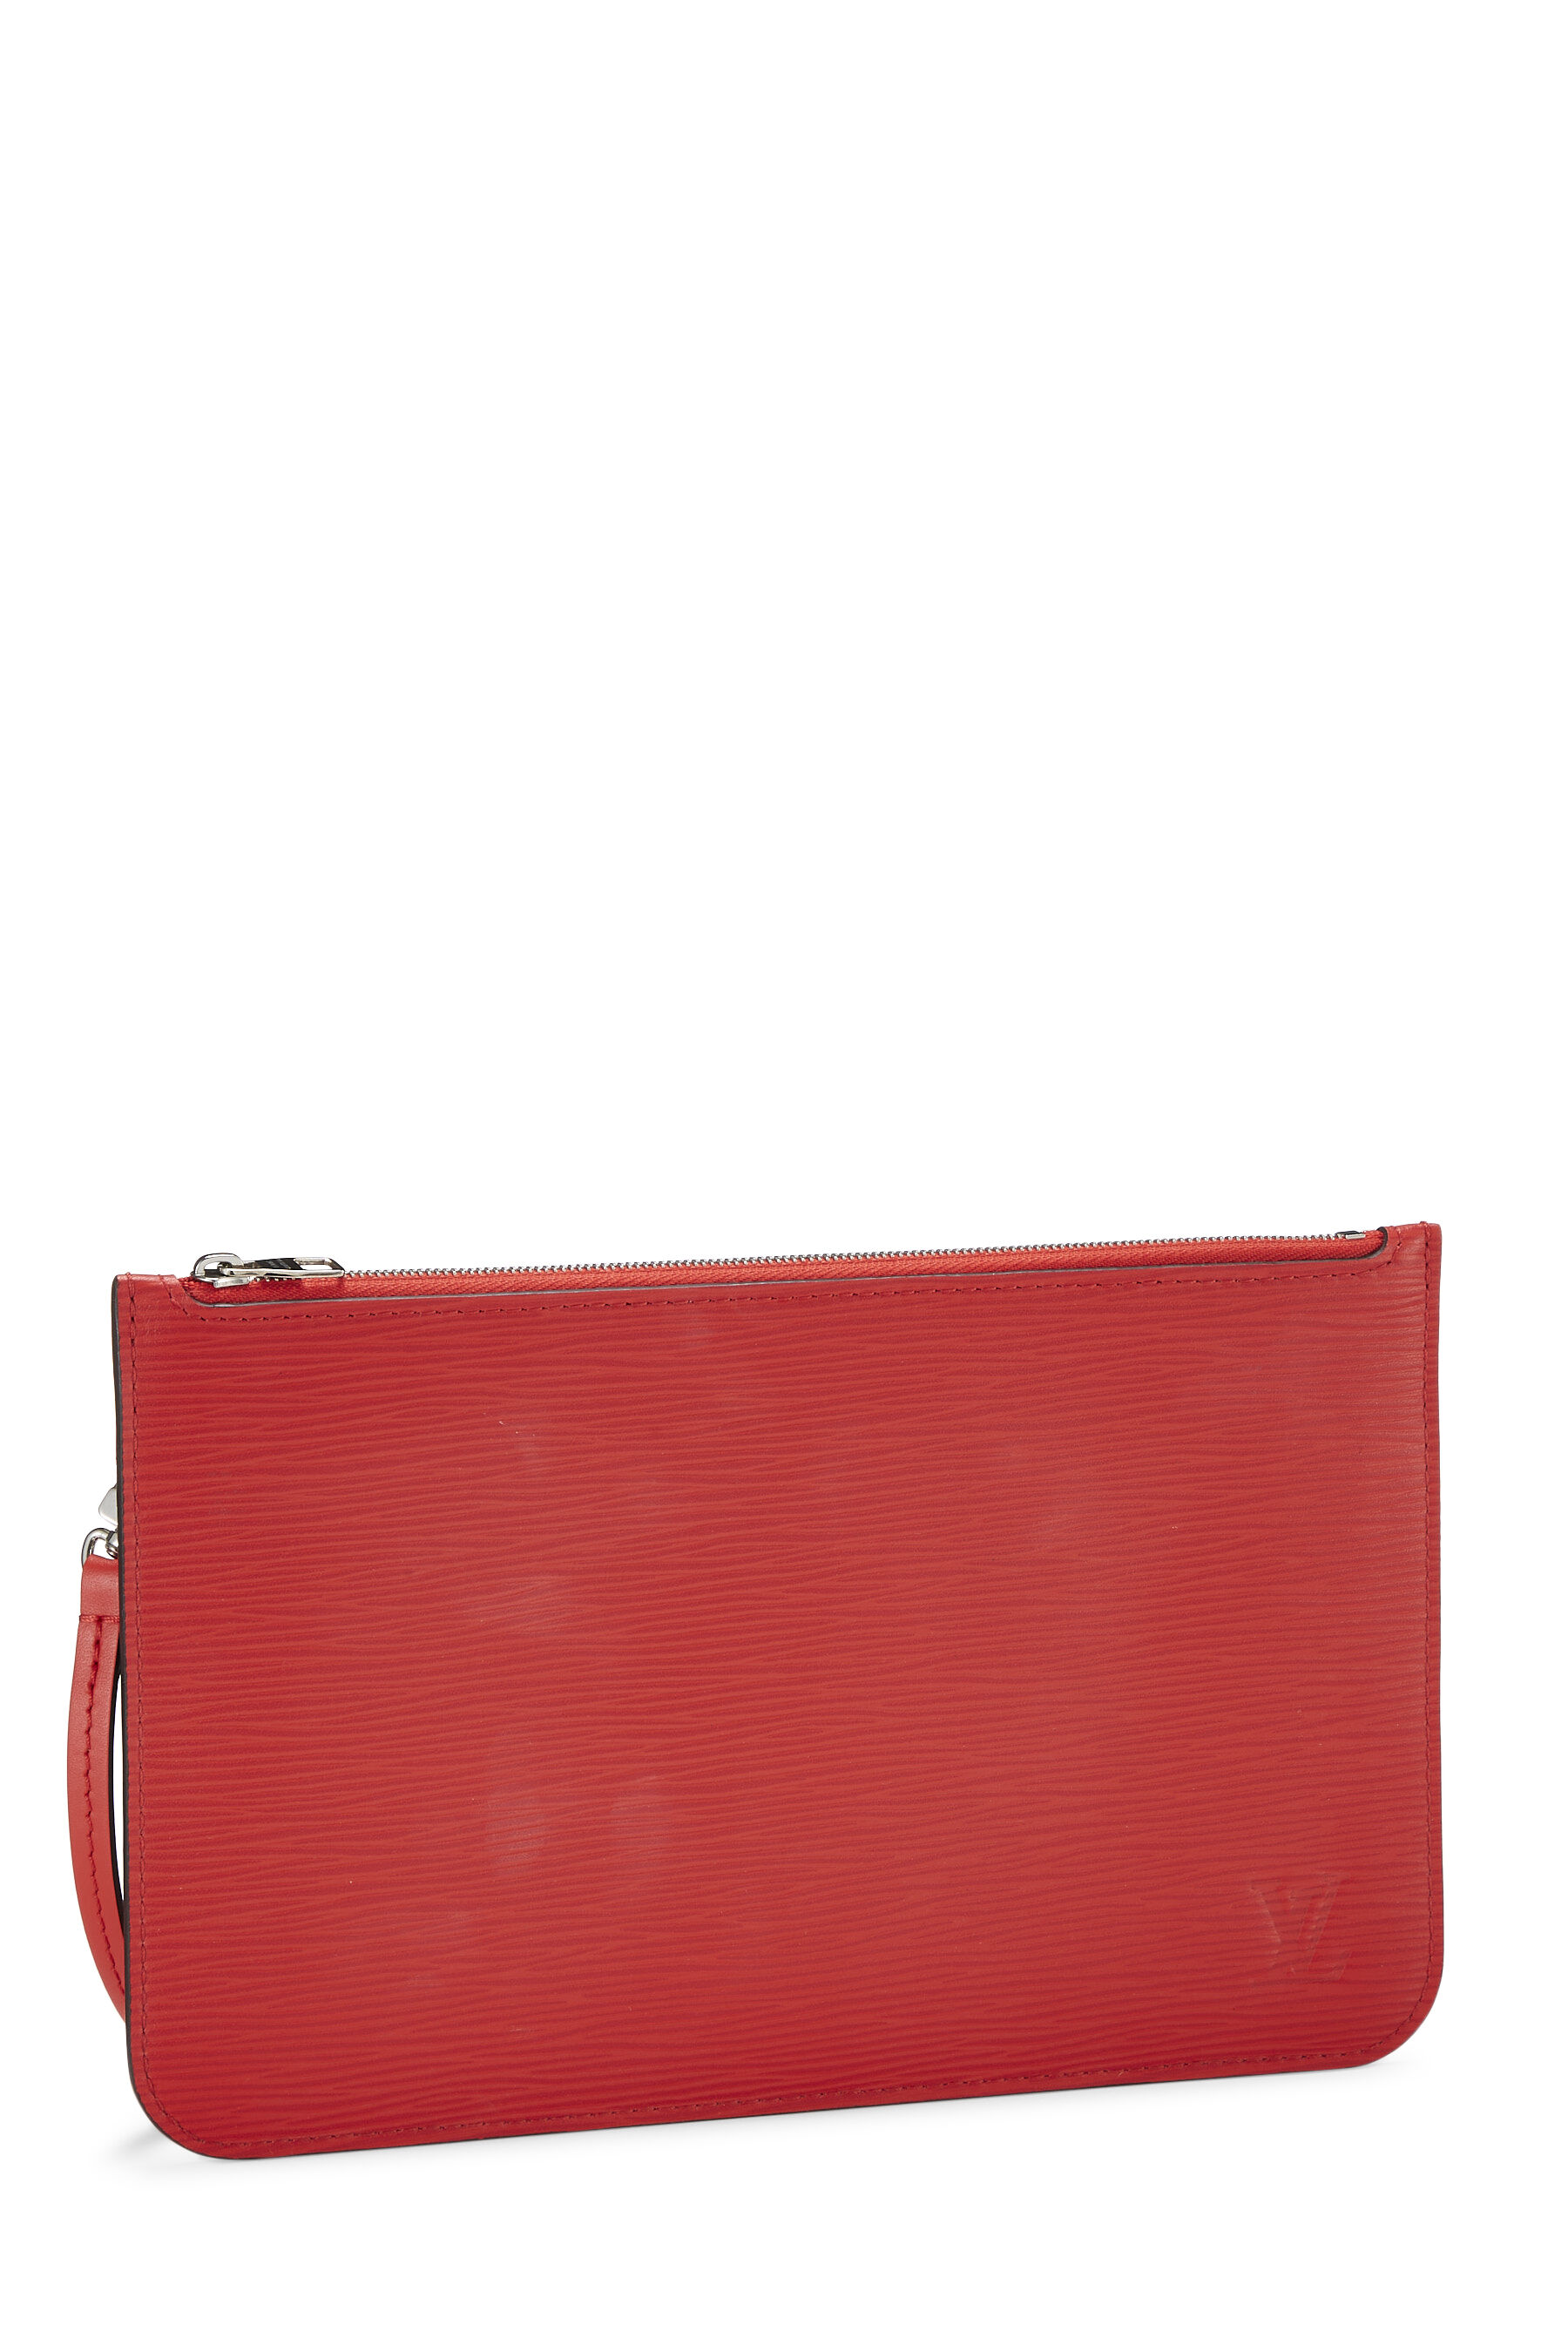 Louis Vuitton - Red EPI Neverfull Pouch mm